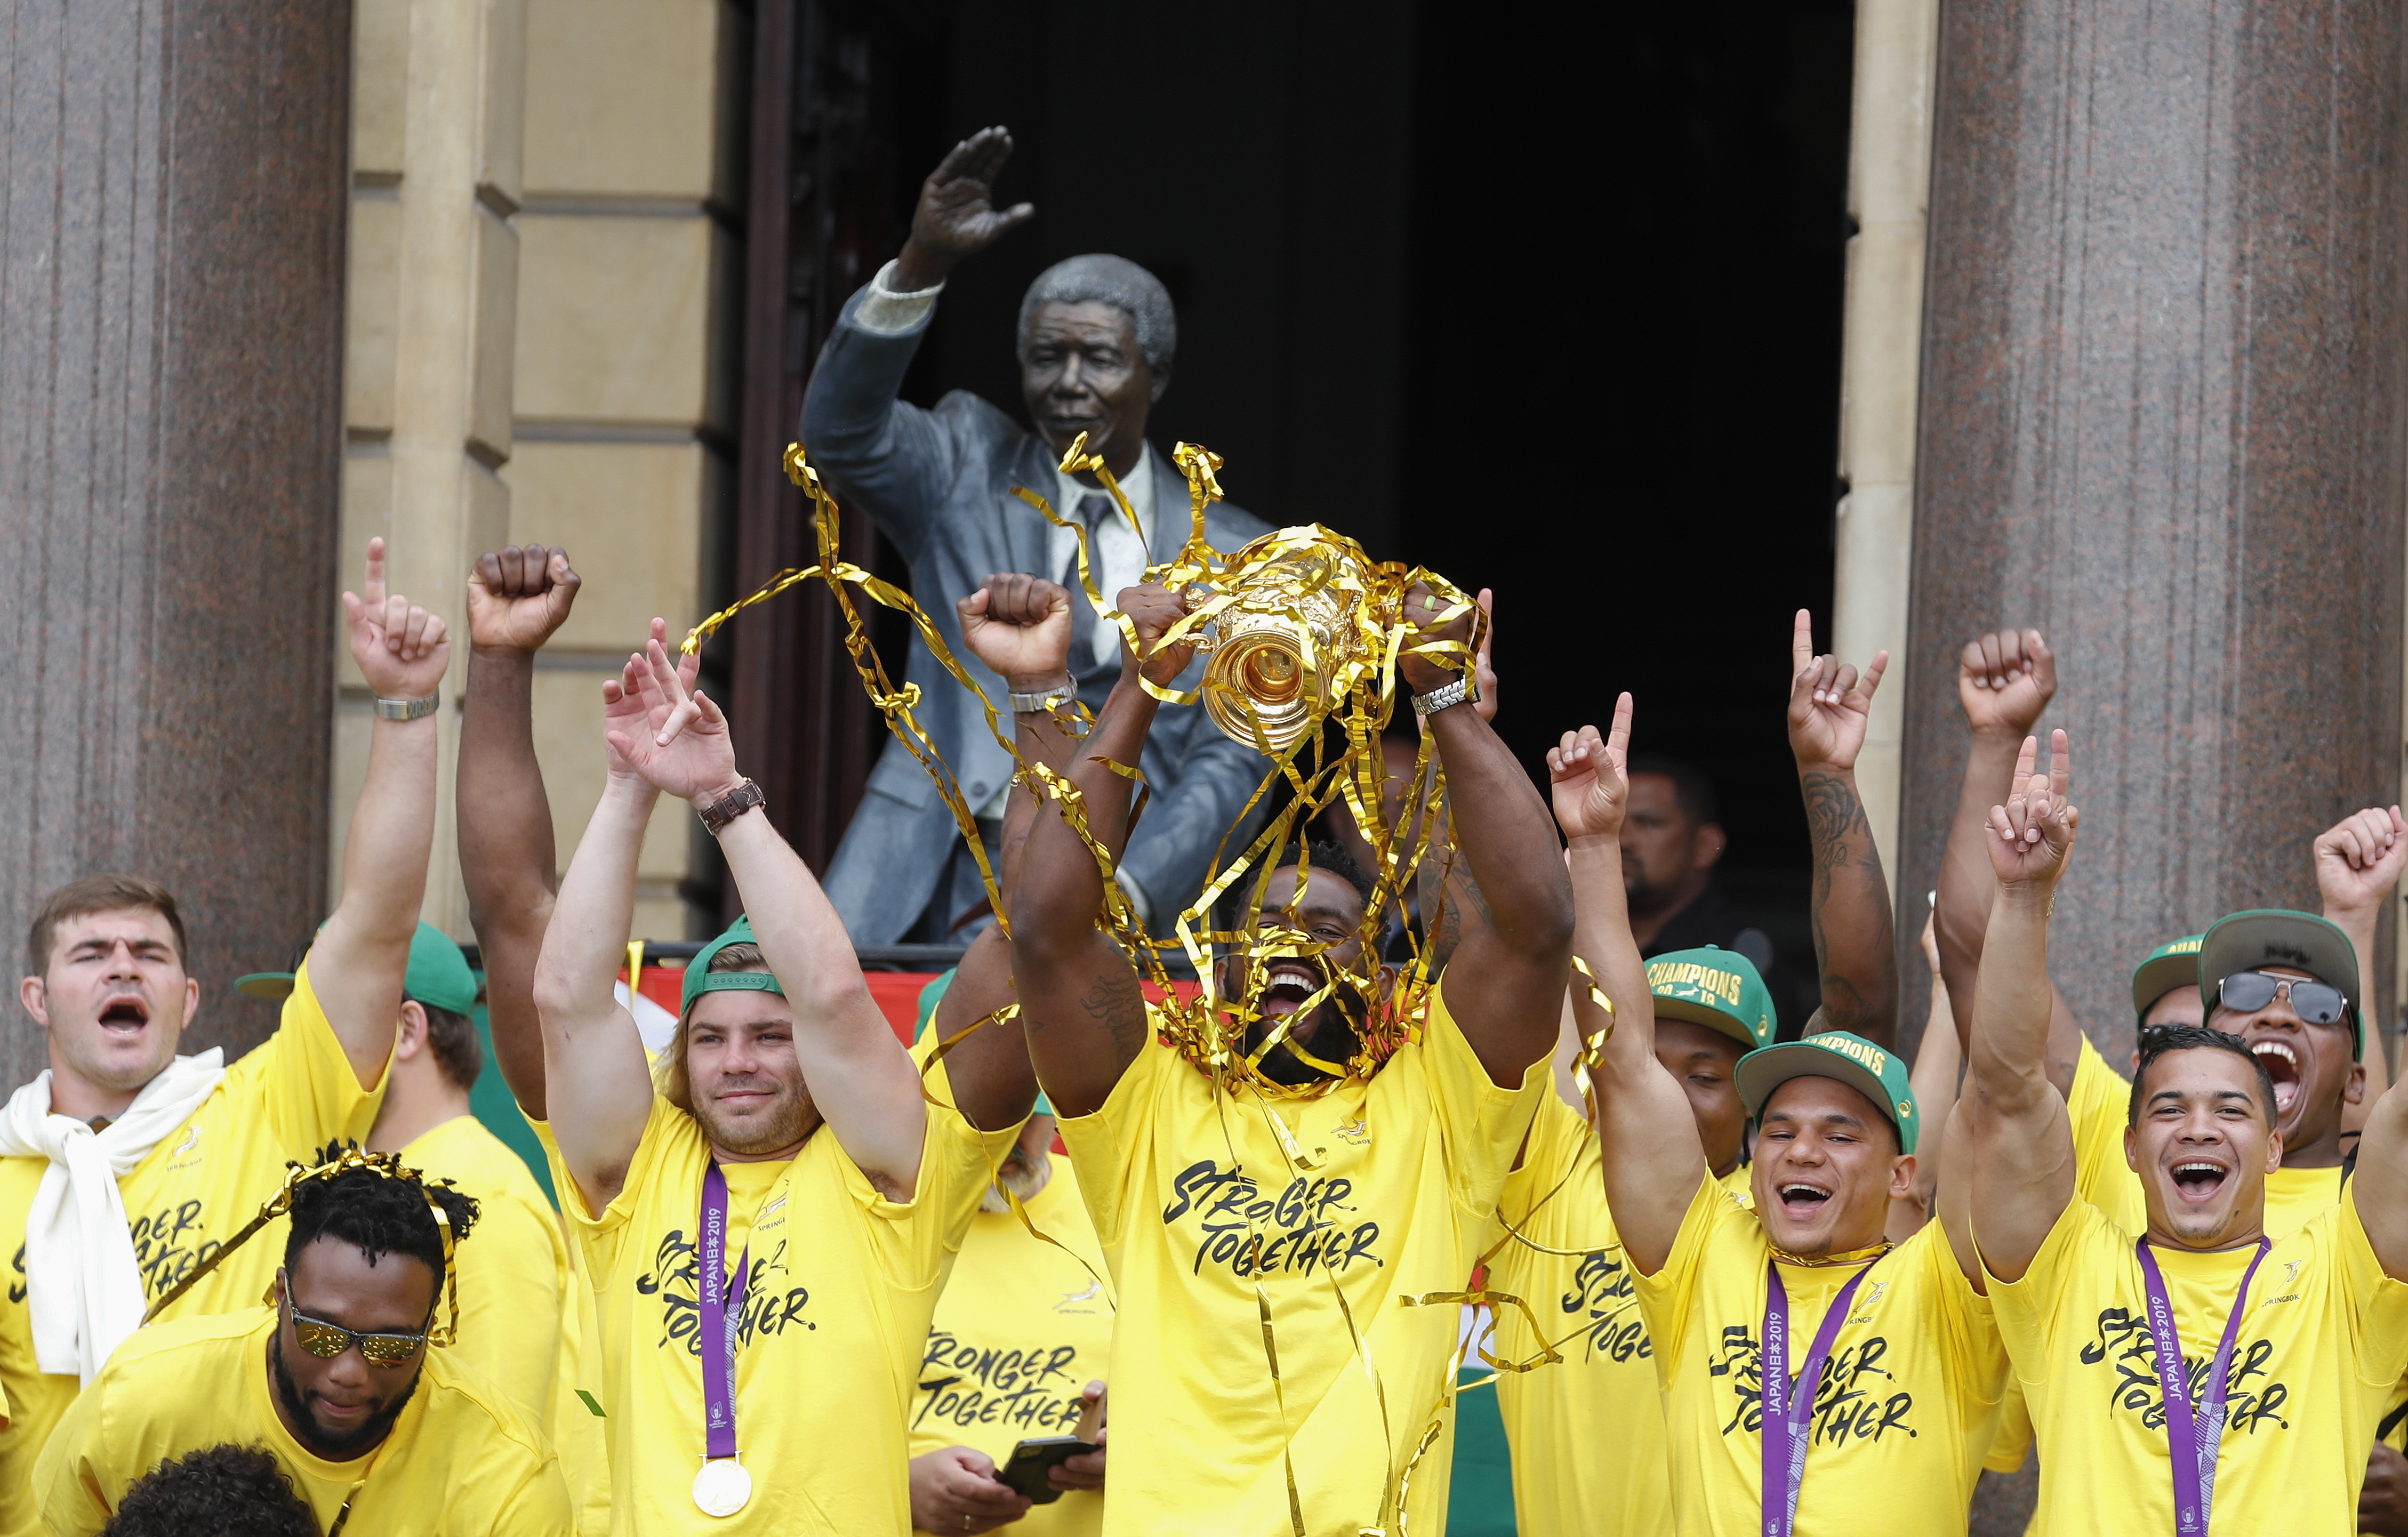 epa07988127 South African rugby captain Siya Kolisi (C) holds up the Webb Ellis Cup with his team in front of a bust of former president Nelson Mandela at the Cape Town City Hall during a trophy tour in Cape Town, South Africa 11 November 2019. Tens of thousands of South Africans came out to see the Springboks finish their nation wide trophy tour in Cape Town after winning the Rugby World Cup. South Africa won the Webb Ellis Cup after defeating England 32-12 in the Rugby World Cup final played in Japan on 02 November 2019. EPA/NIC BOTHMA